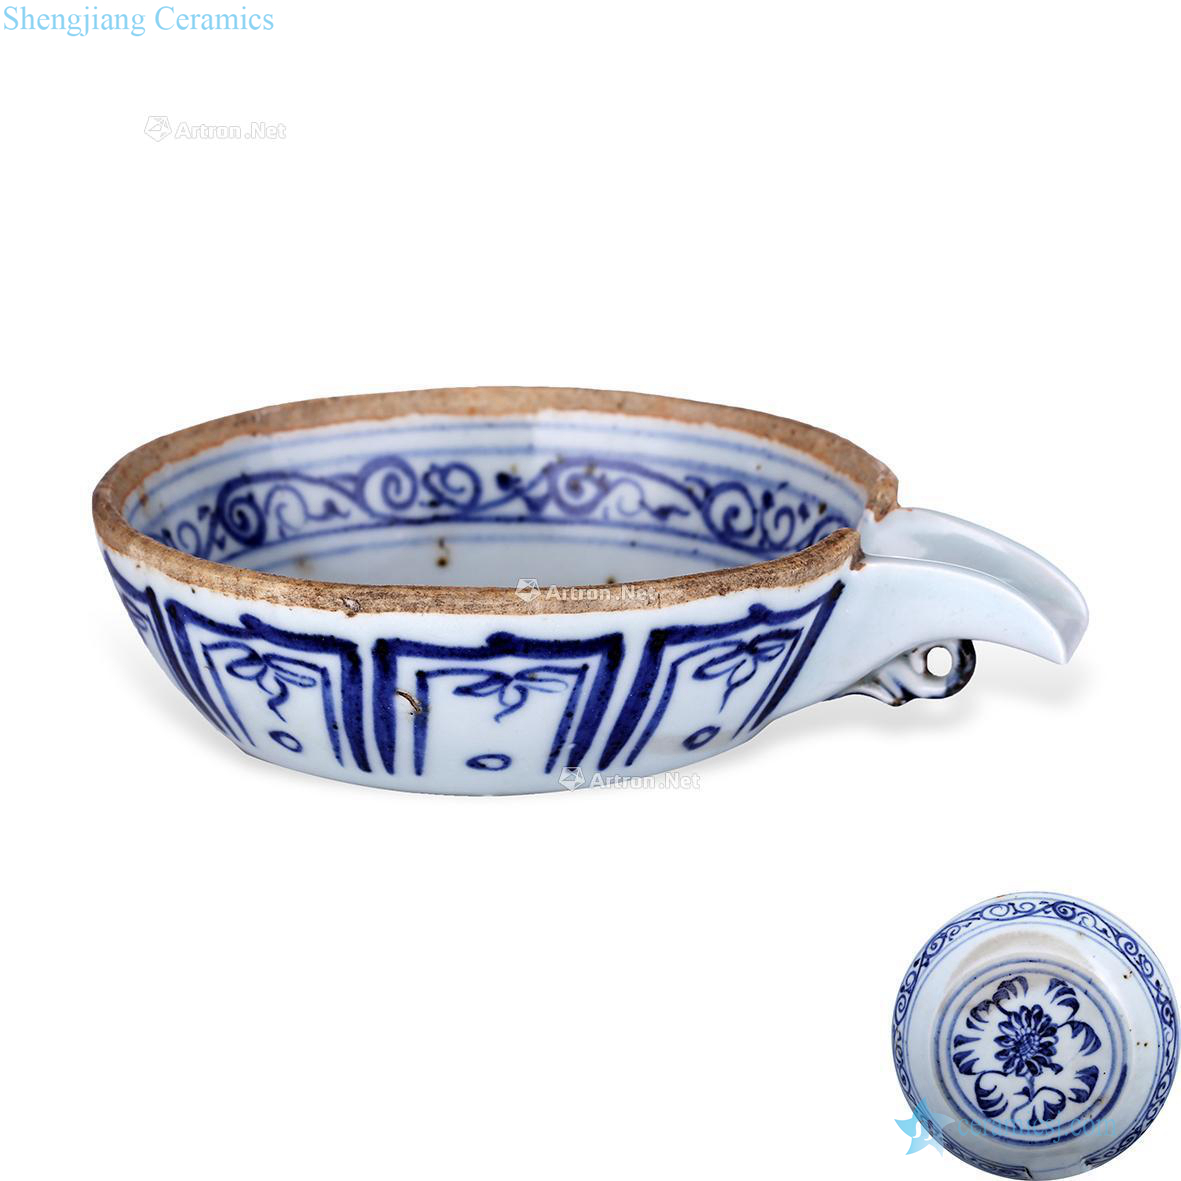 The yuan dynasty Blue and white flower wen yi